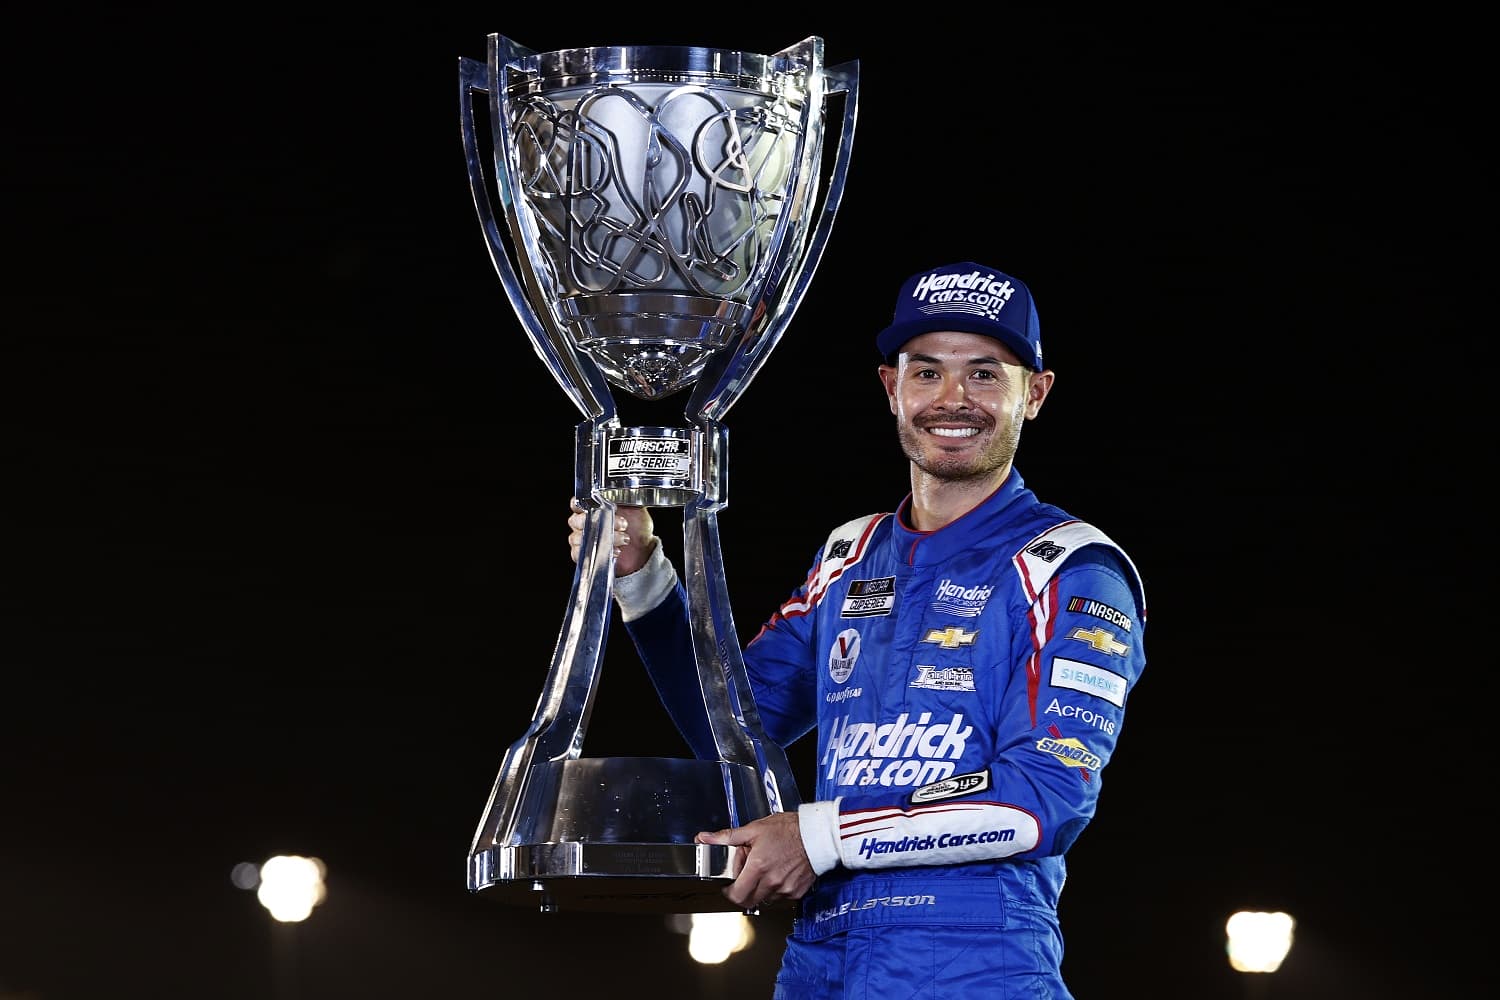 Kyle Larson poses for photos after winning the NASCAR Cup Series Championship at Phoenix Raceway on Nov. 7, 2021. | Sean Gardner/Getty Images